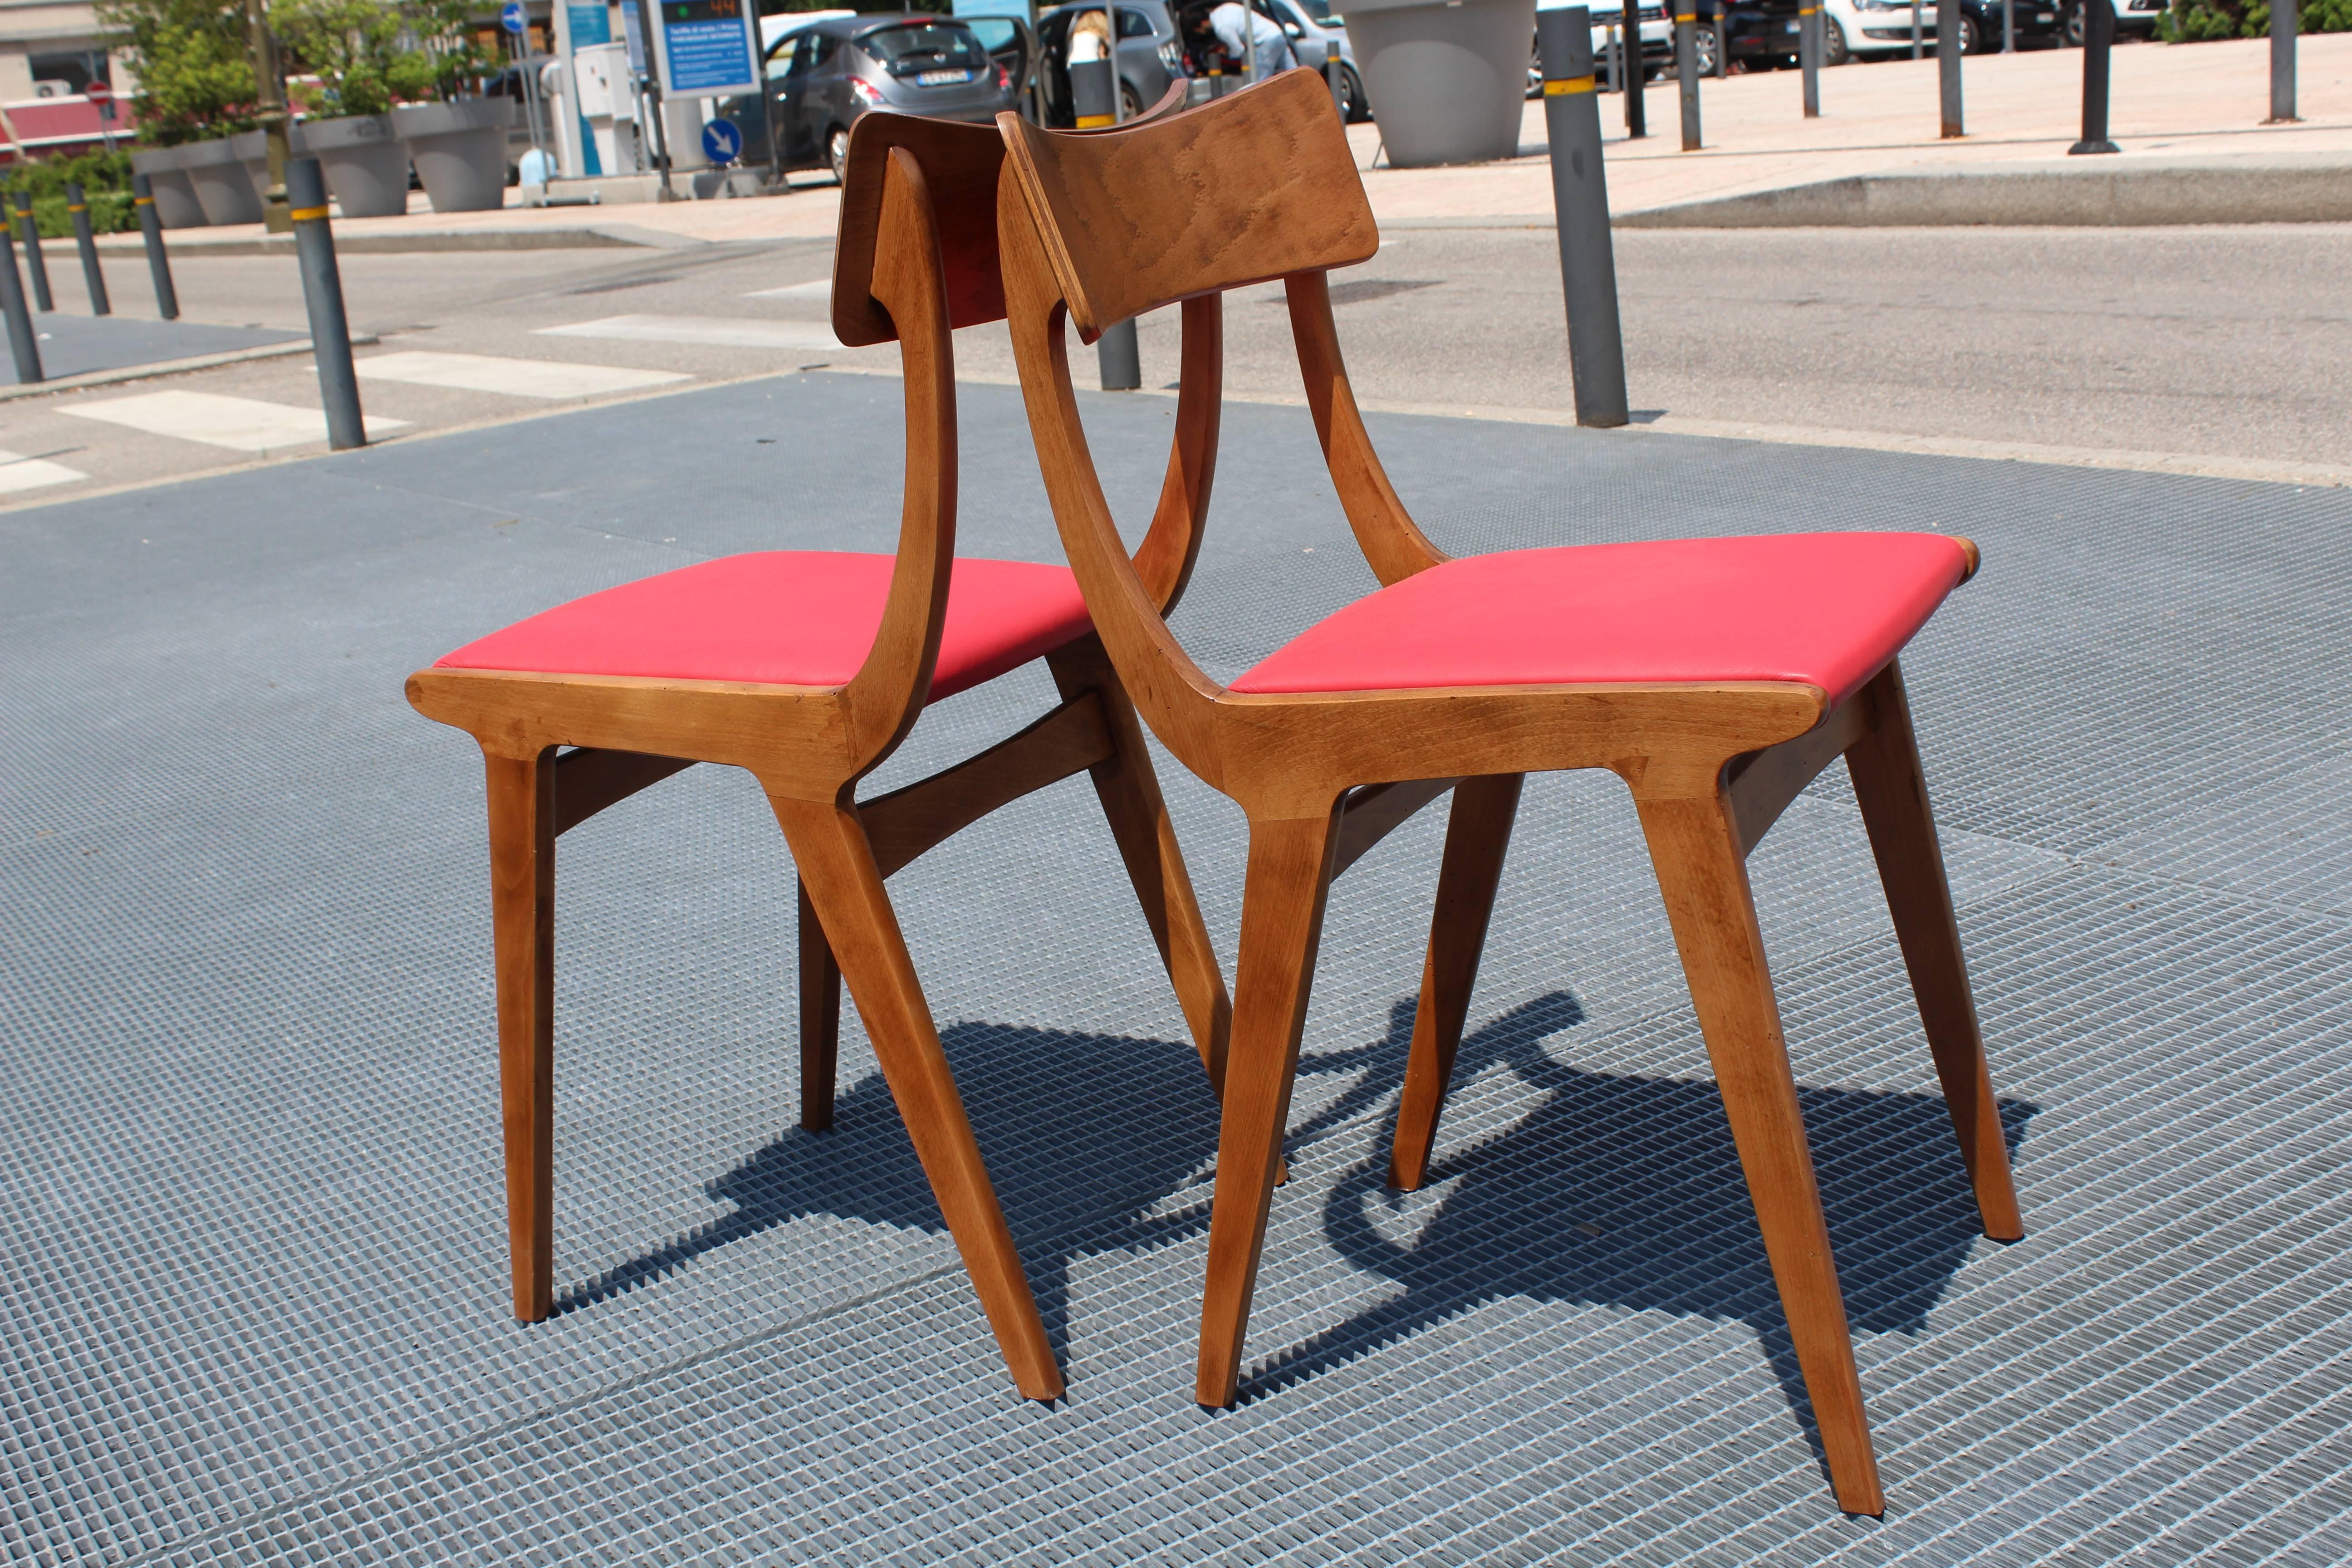 Mid-20th Century Italian Wood and Red Leather Chairs, Set of Two, 1950s